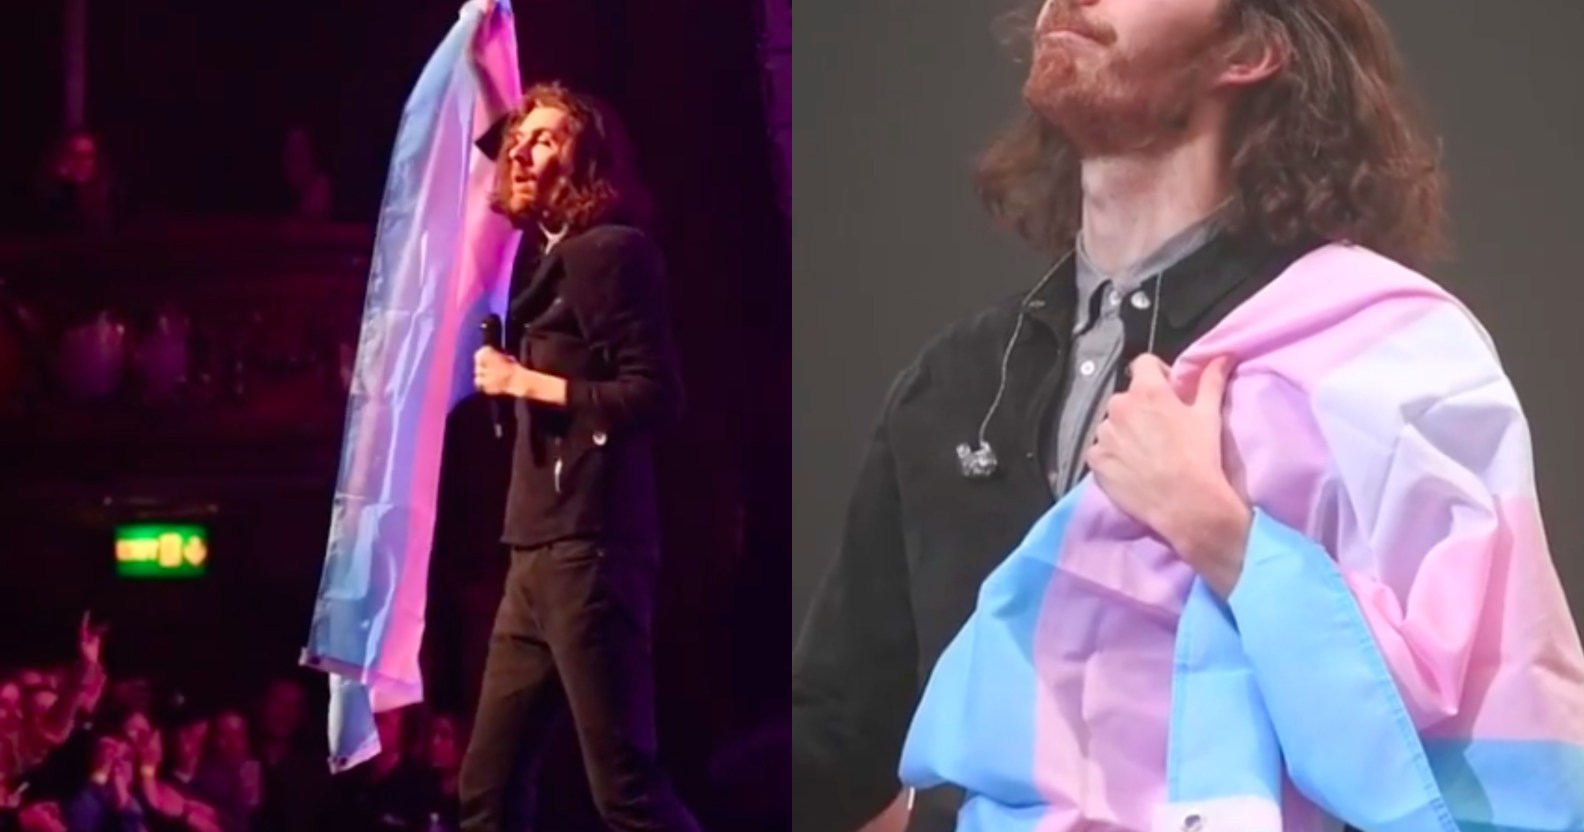 Irish singer Hozier hoisted a trans flag that a fan threw on stage and Twitter users are beside themselves. (Twitter)